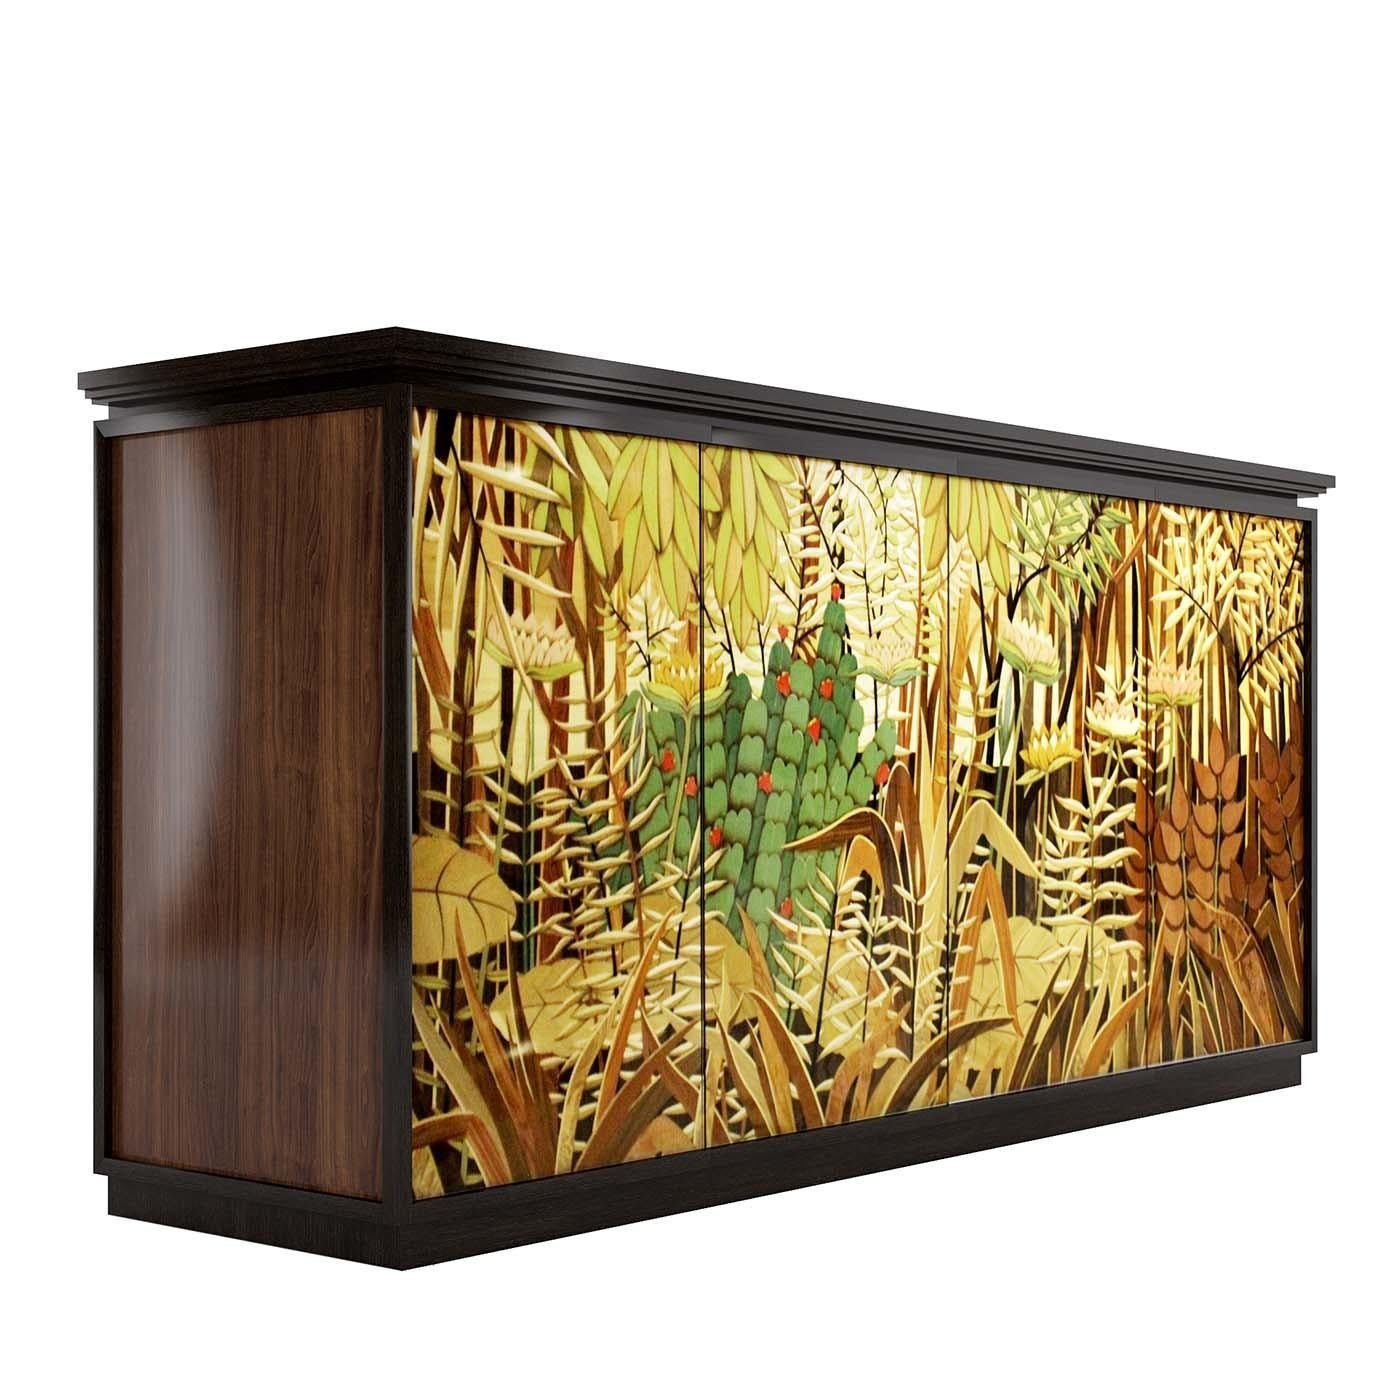 A sculptural work of art defined by meticulous craftsmanship, this sideboard boasts impeccable marquetry covering the front doors inspired by French artist Henri Rosseau's art. Part of the Jungle Collection and exuding an Art Deco allure, this piece